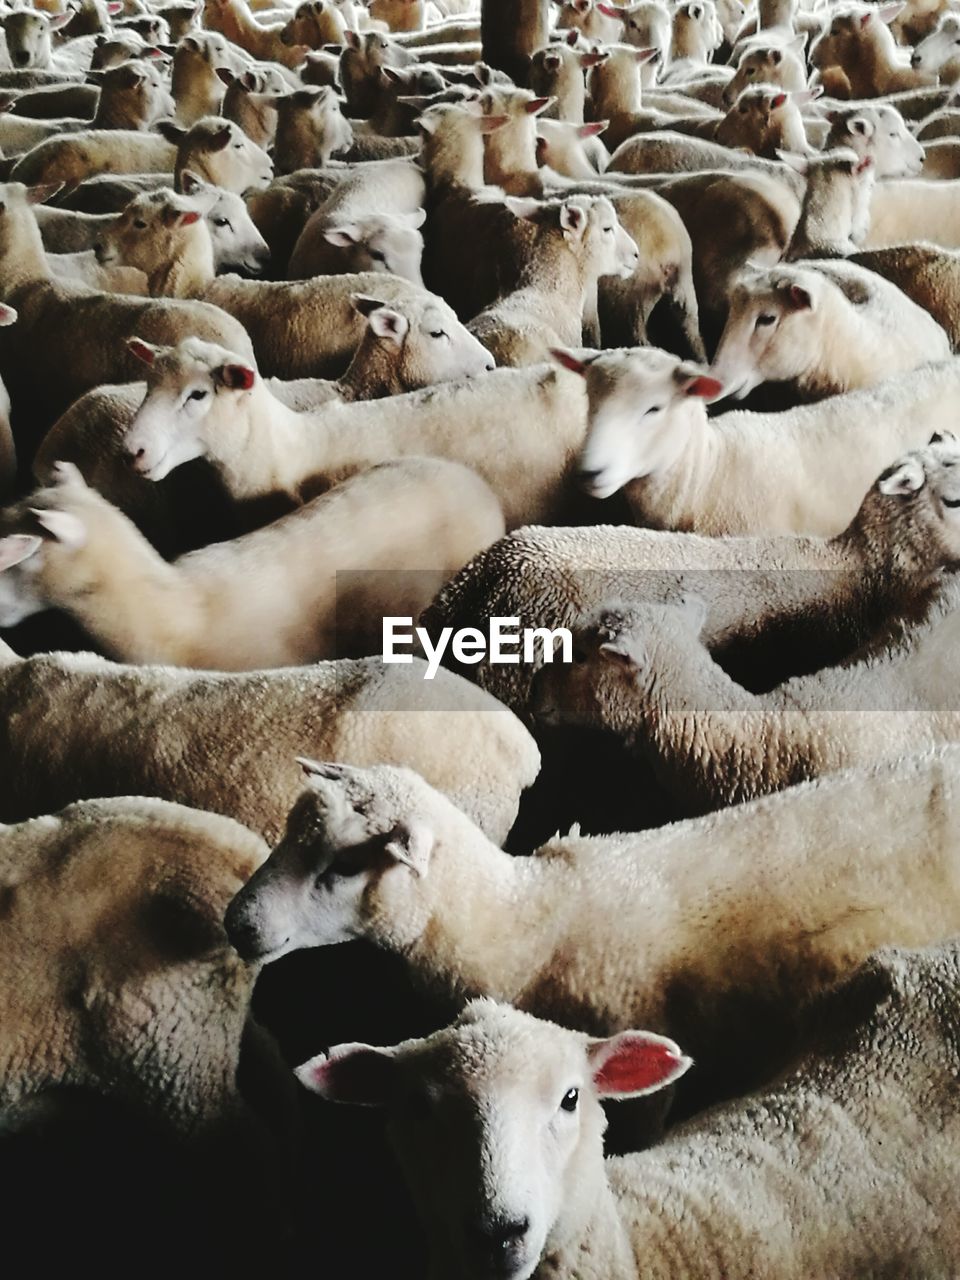 FLOCK OF SHEEP IN A PEN